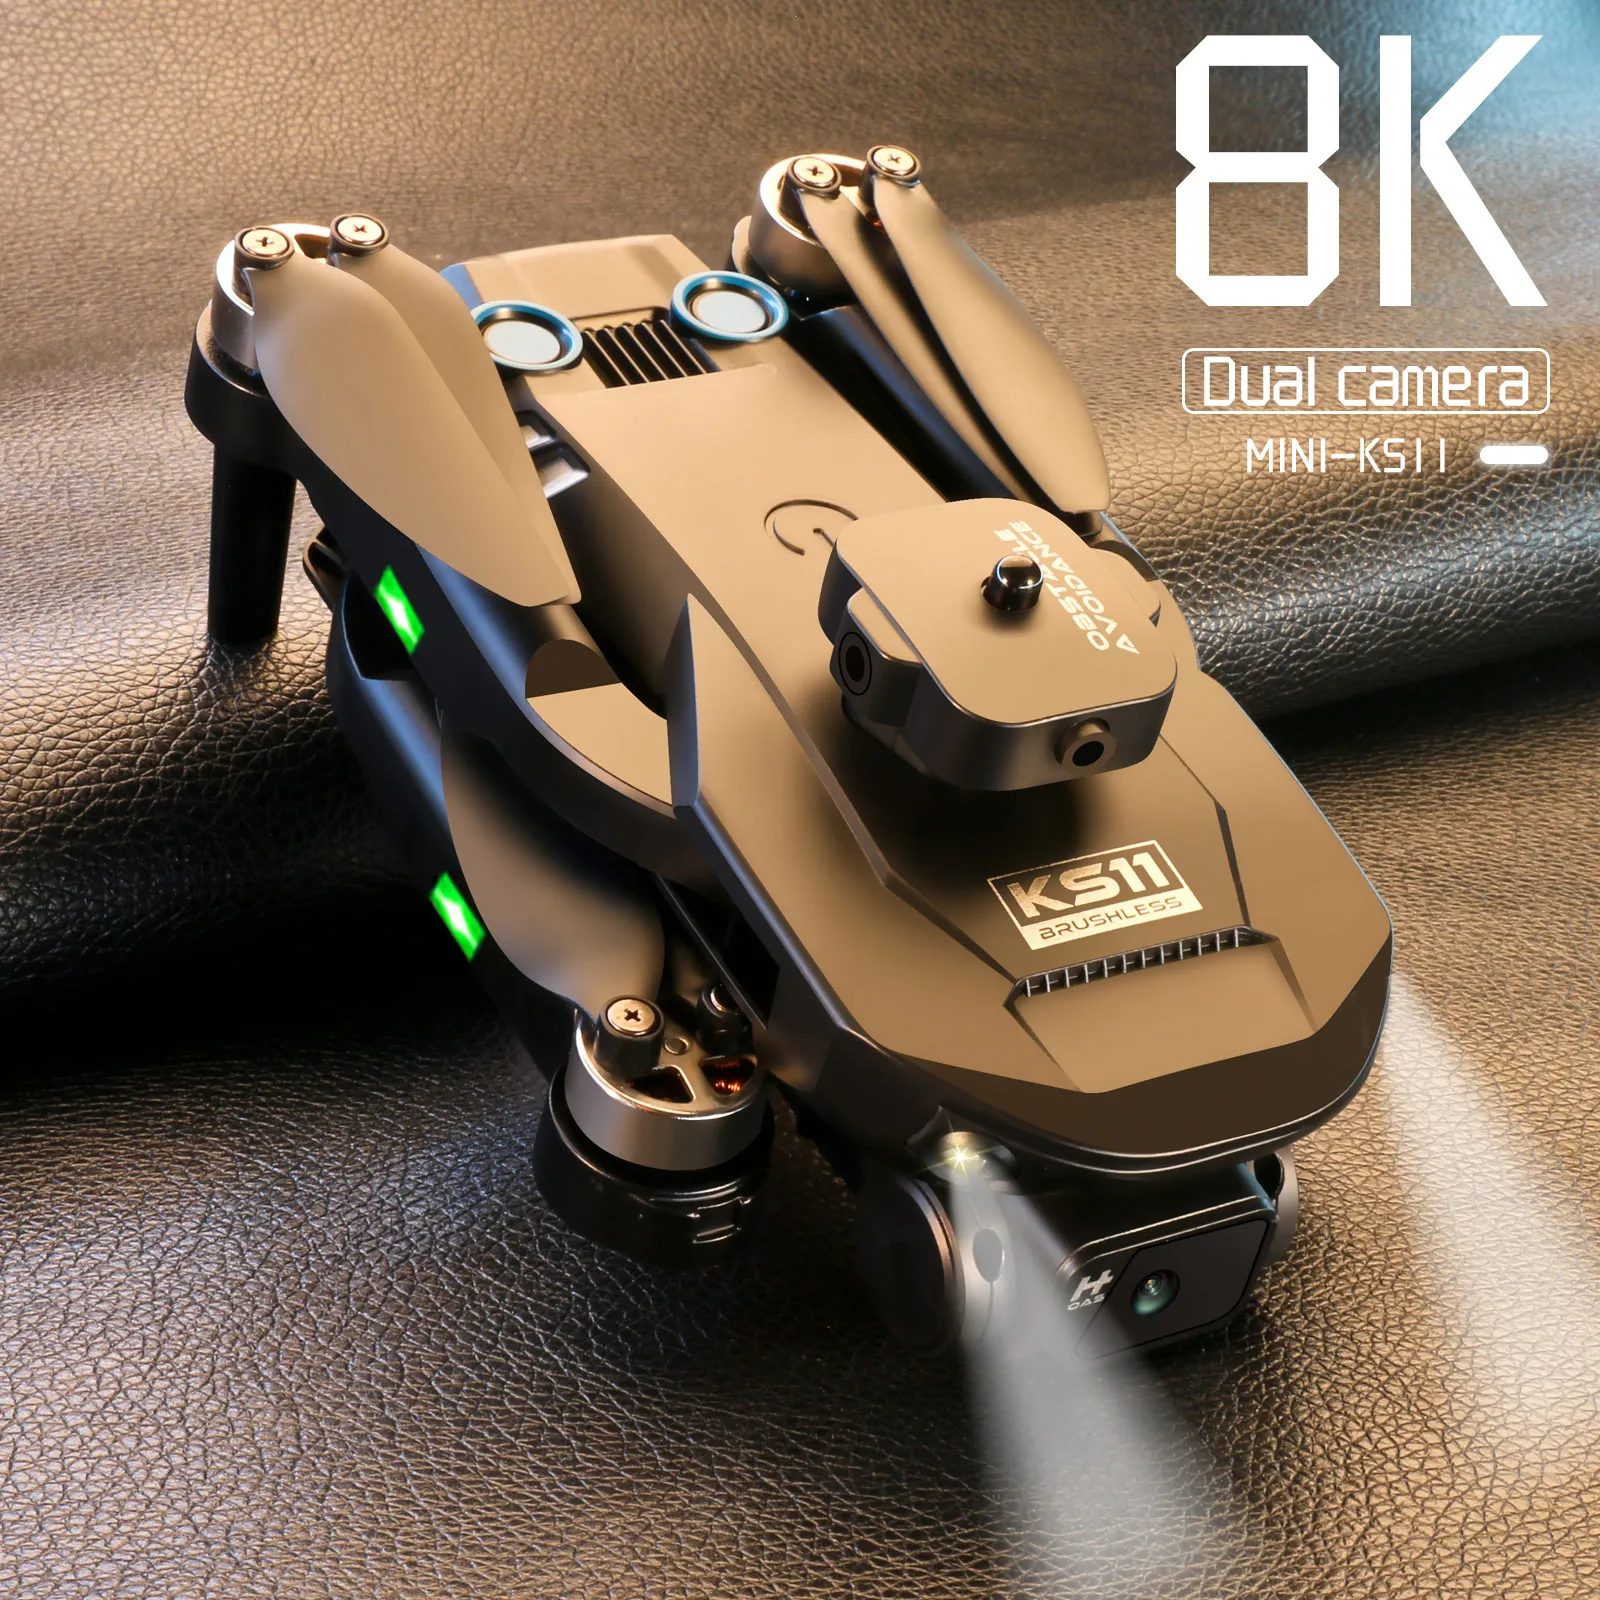 

New KS11 Mini Drone 4k Profesional 8K HD Camera Obstacle Avoidance Aerial Photography Brushless Foldable Quadcopter 1.2km